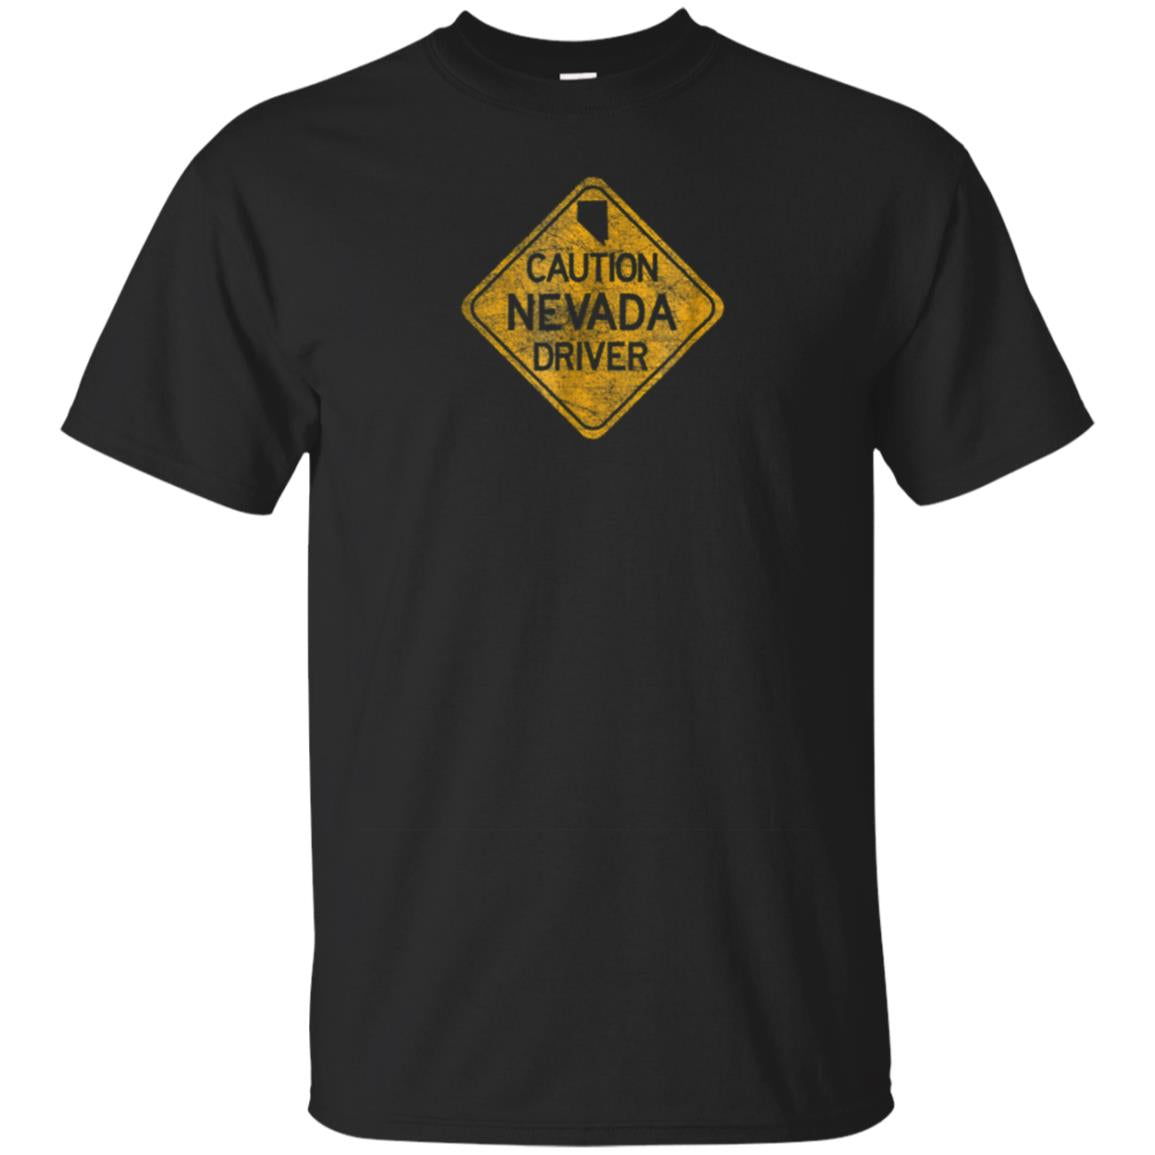 Nevada State Drivers Caution Sign T-shirt